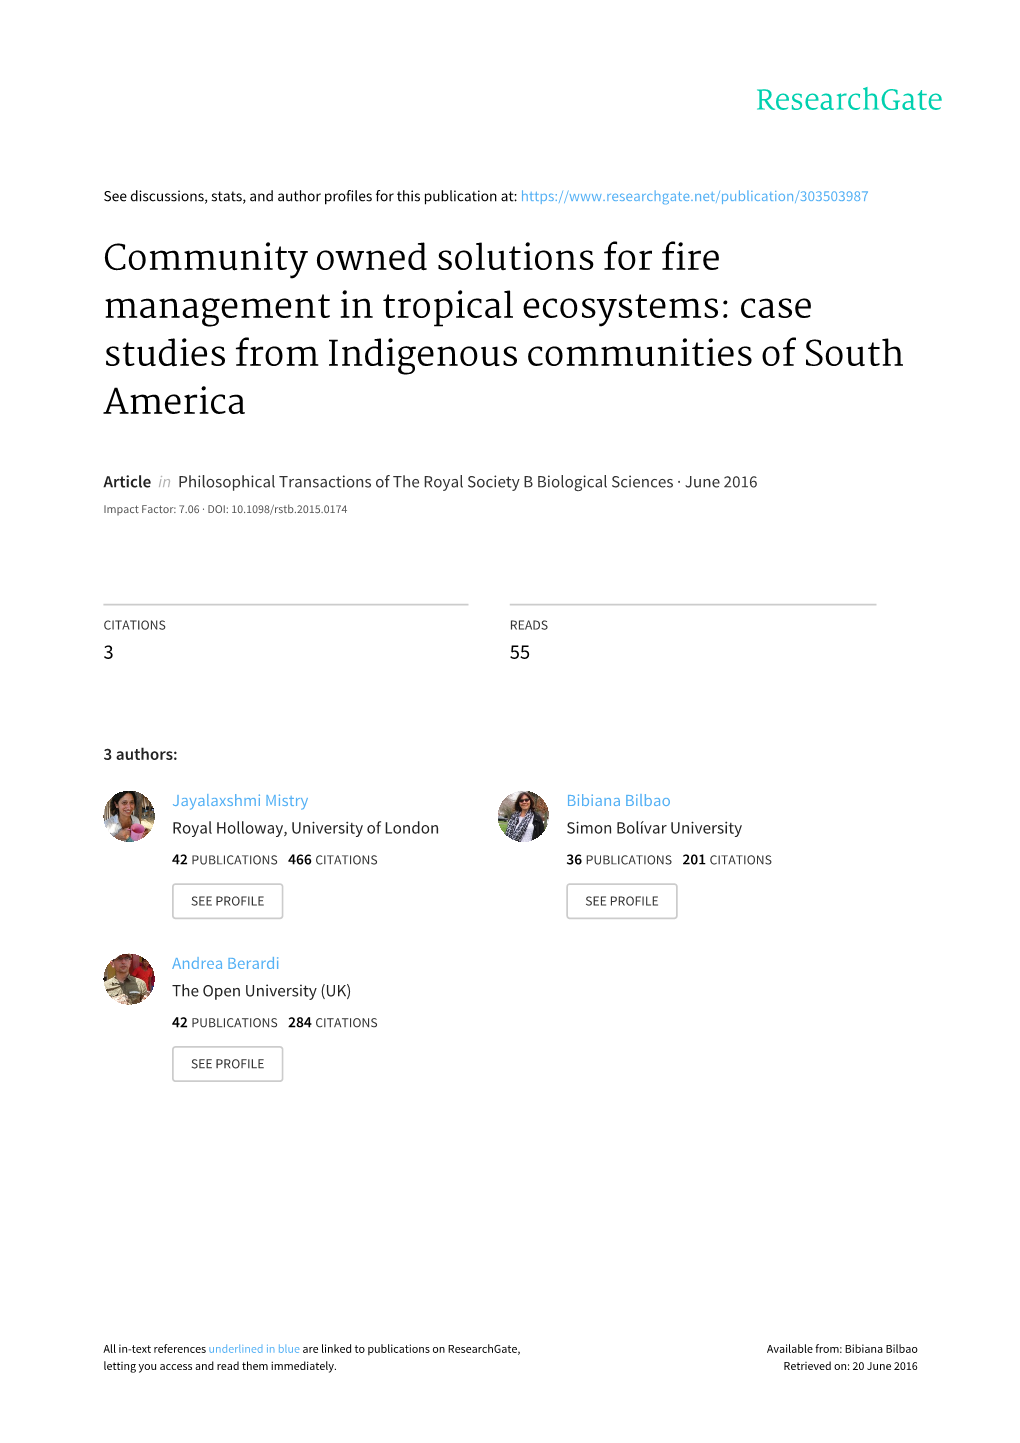 Community Owned Solutions for Fire Management in Tropical Ecosystems: Case Studies from Indigenous Communities of South America